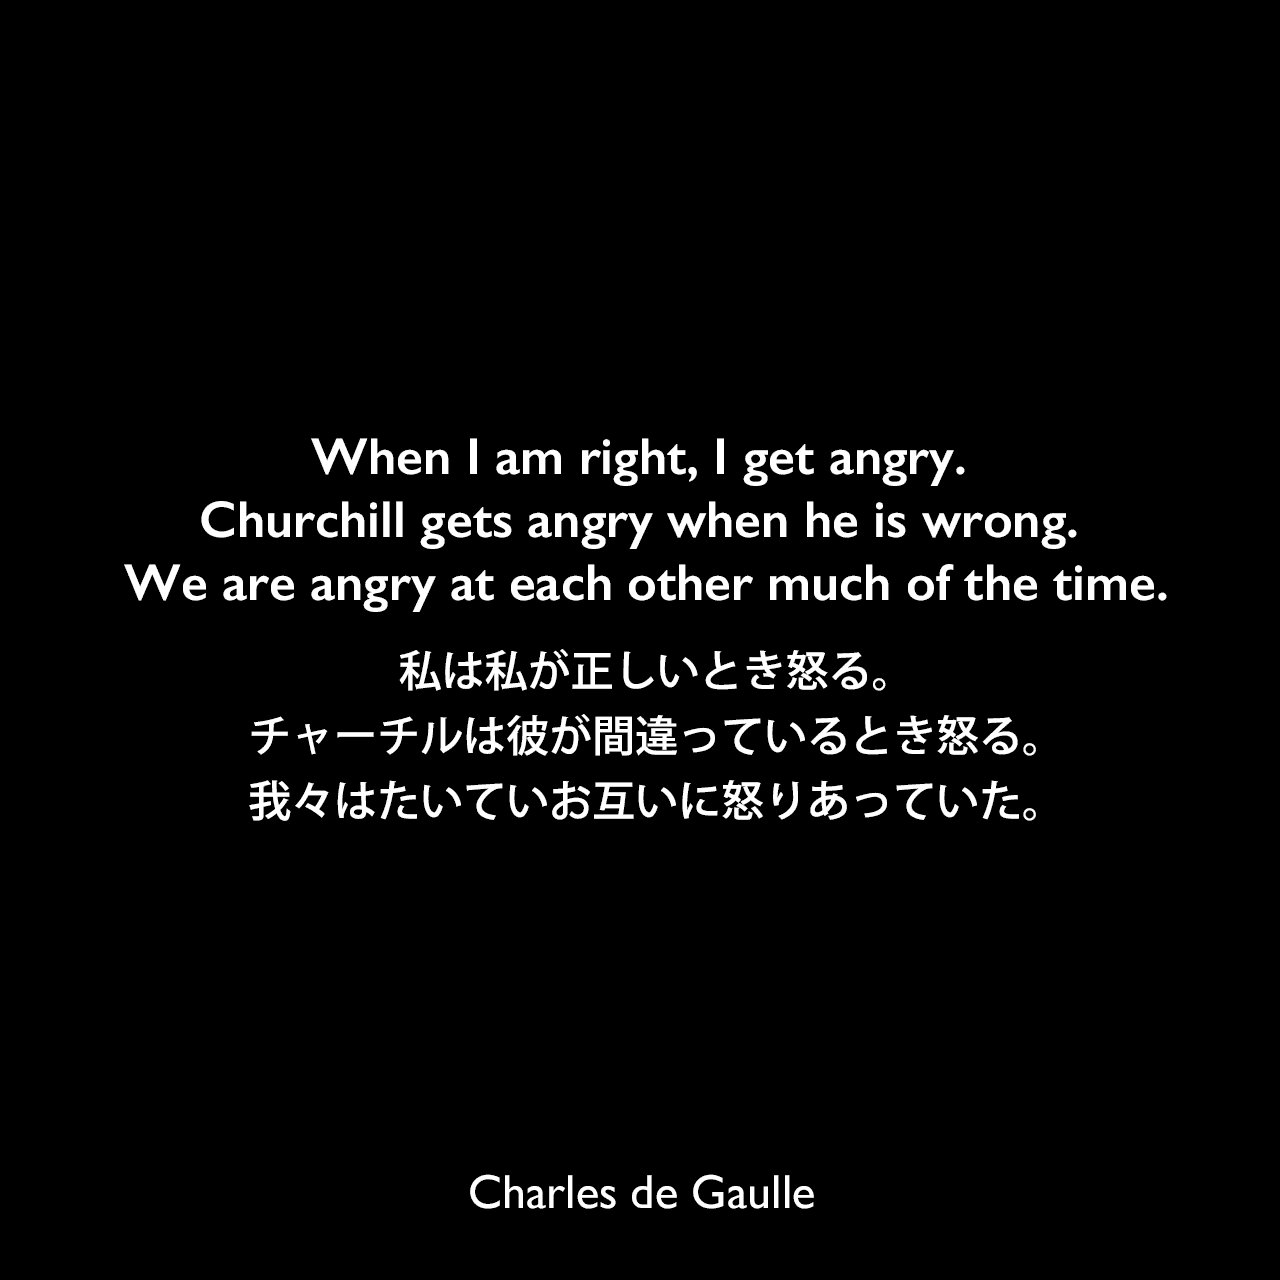 When I am right, I get angry. Churchill gets angry when he is wrong. We are angry at each other much of the time.私は私が正しいとき怒る。チャーチルは彼が間違っているとき怒る。我々はたいていお互いに怒りあっていた。Charles de Gaulle